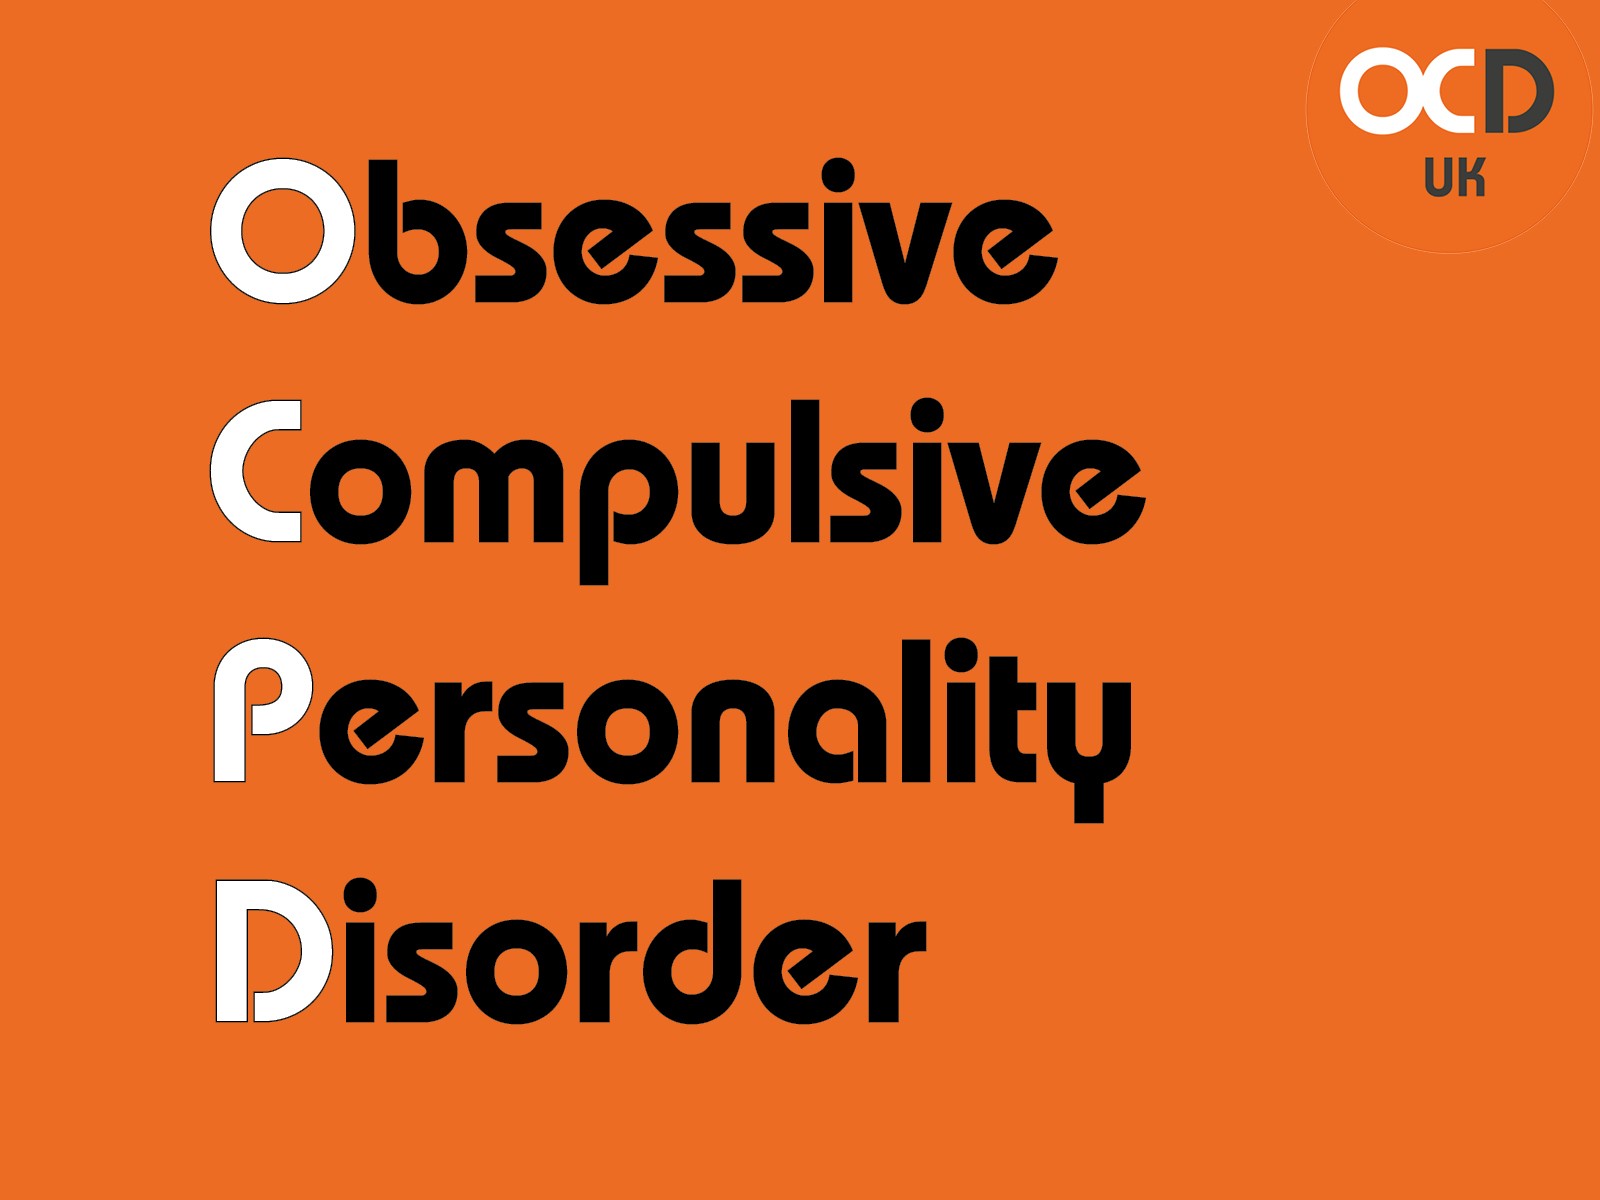 People with obsessive compulsive personality disorder